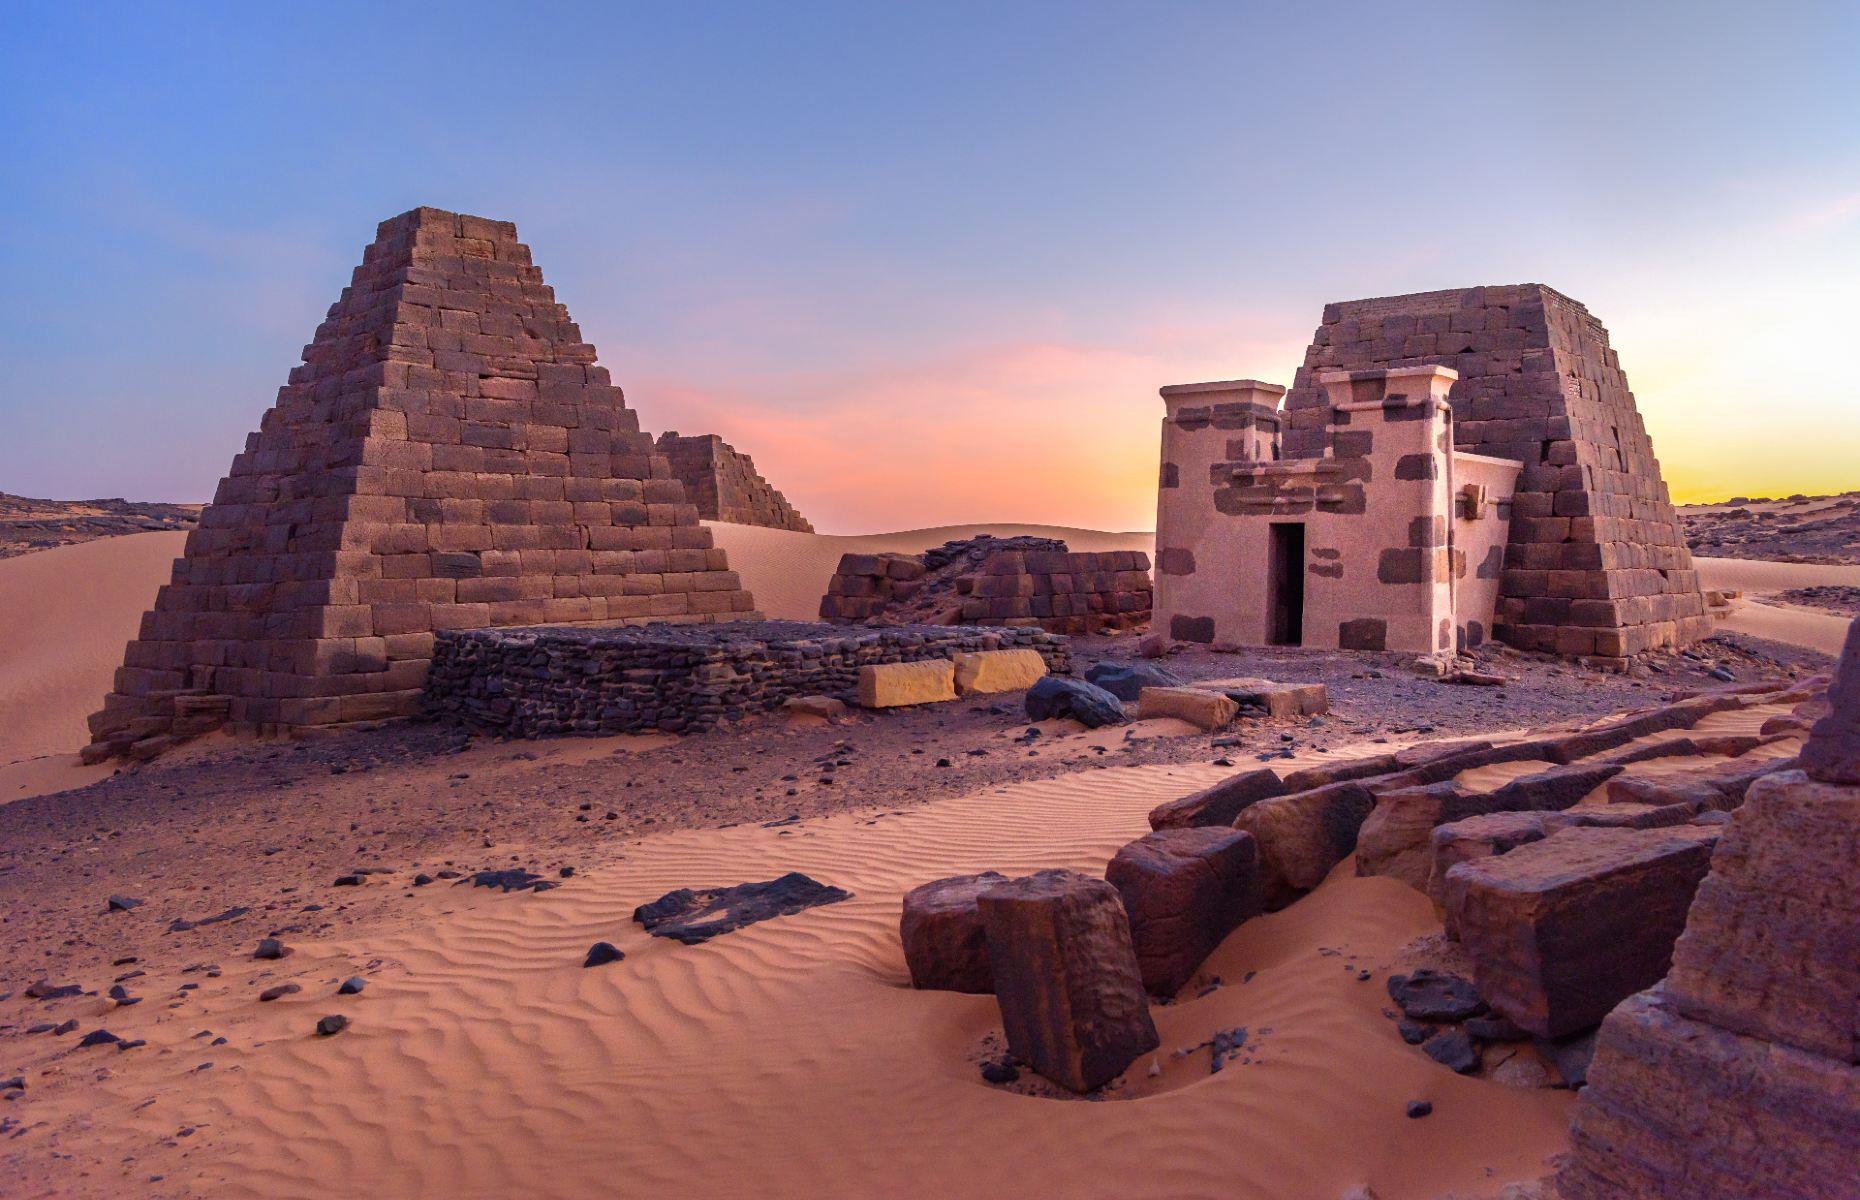 <p>While tourism to Sudan may not currently be on the cards, the country still has stunning attractions. One of them is Meroë (pictured), a UNESCO World Heritage Site on the banks of the Nile home to ancient pyramids dated between 300 BC and AD 300. The surrounding Nubian Desert is home to mile upon mile of untouched sandy wilderness, wandered by lonely ibex and Barbary sheep.</p>